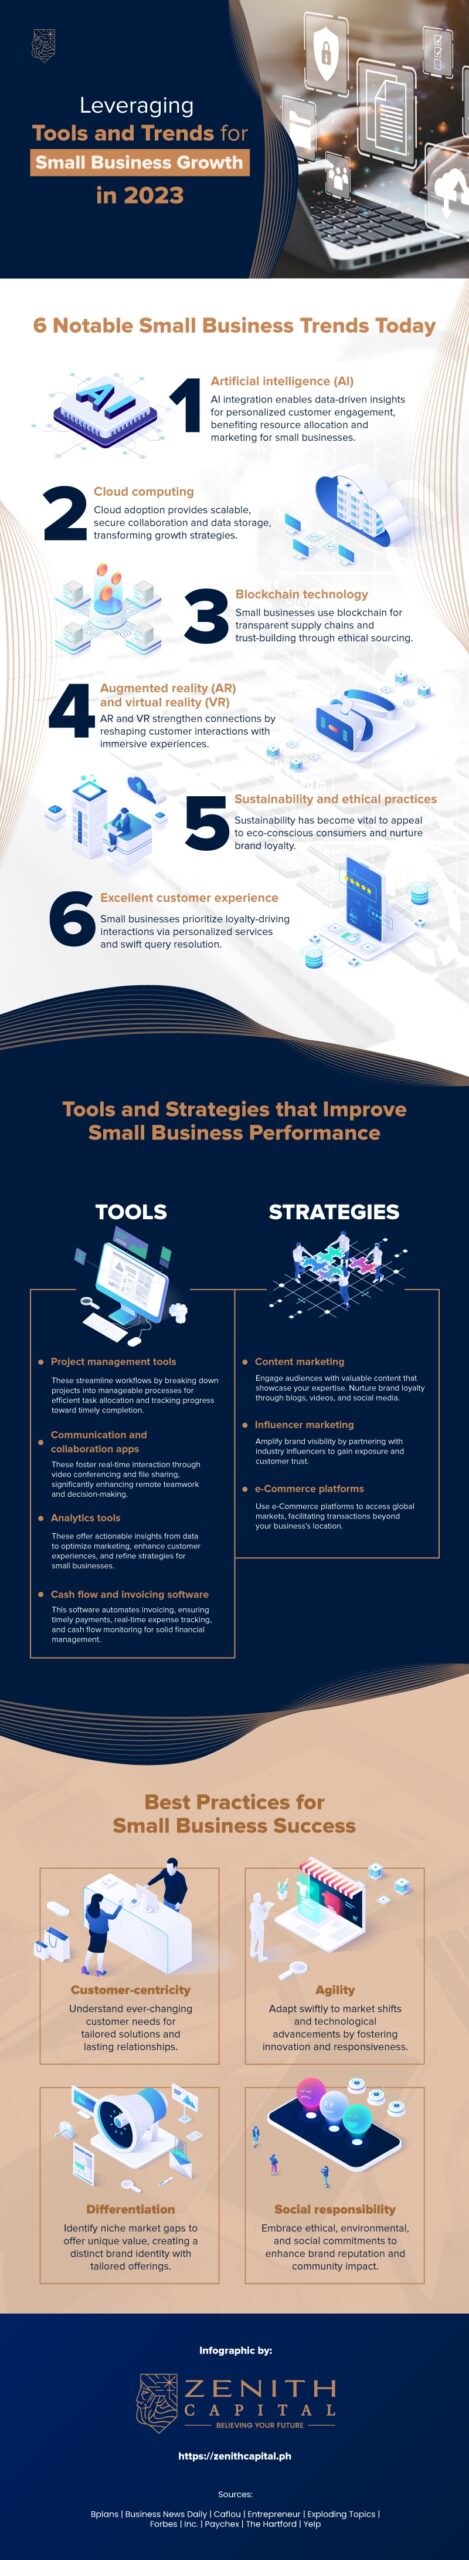 Leveraging Tools and Trends for Small Business Growth in 2023